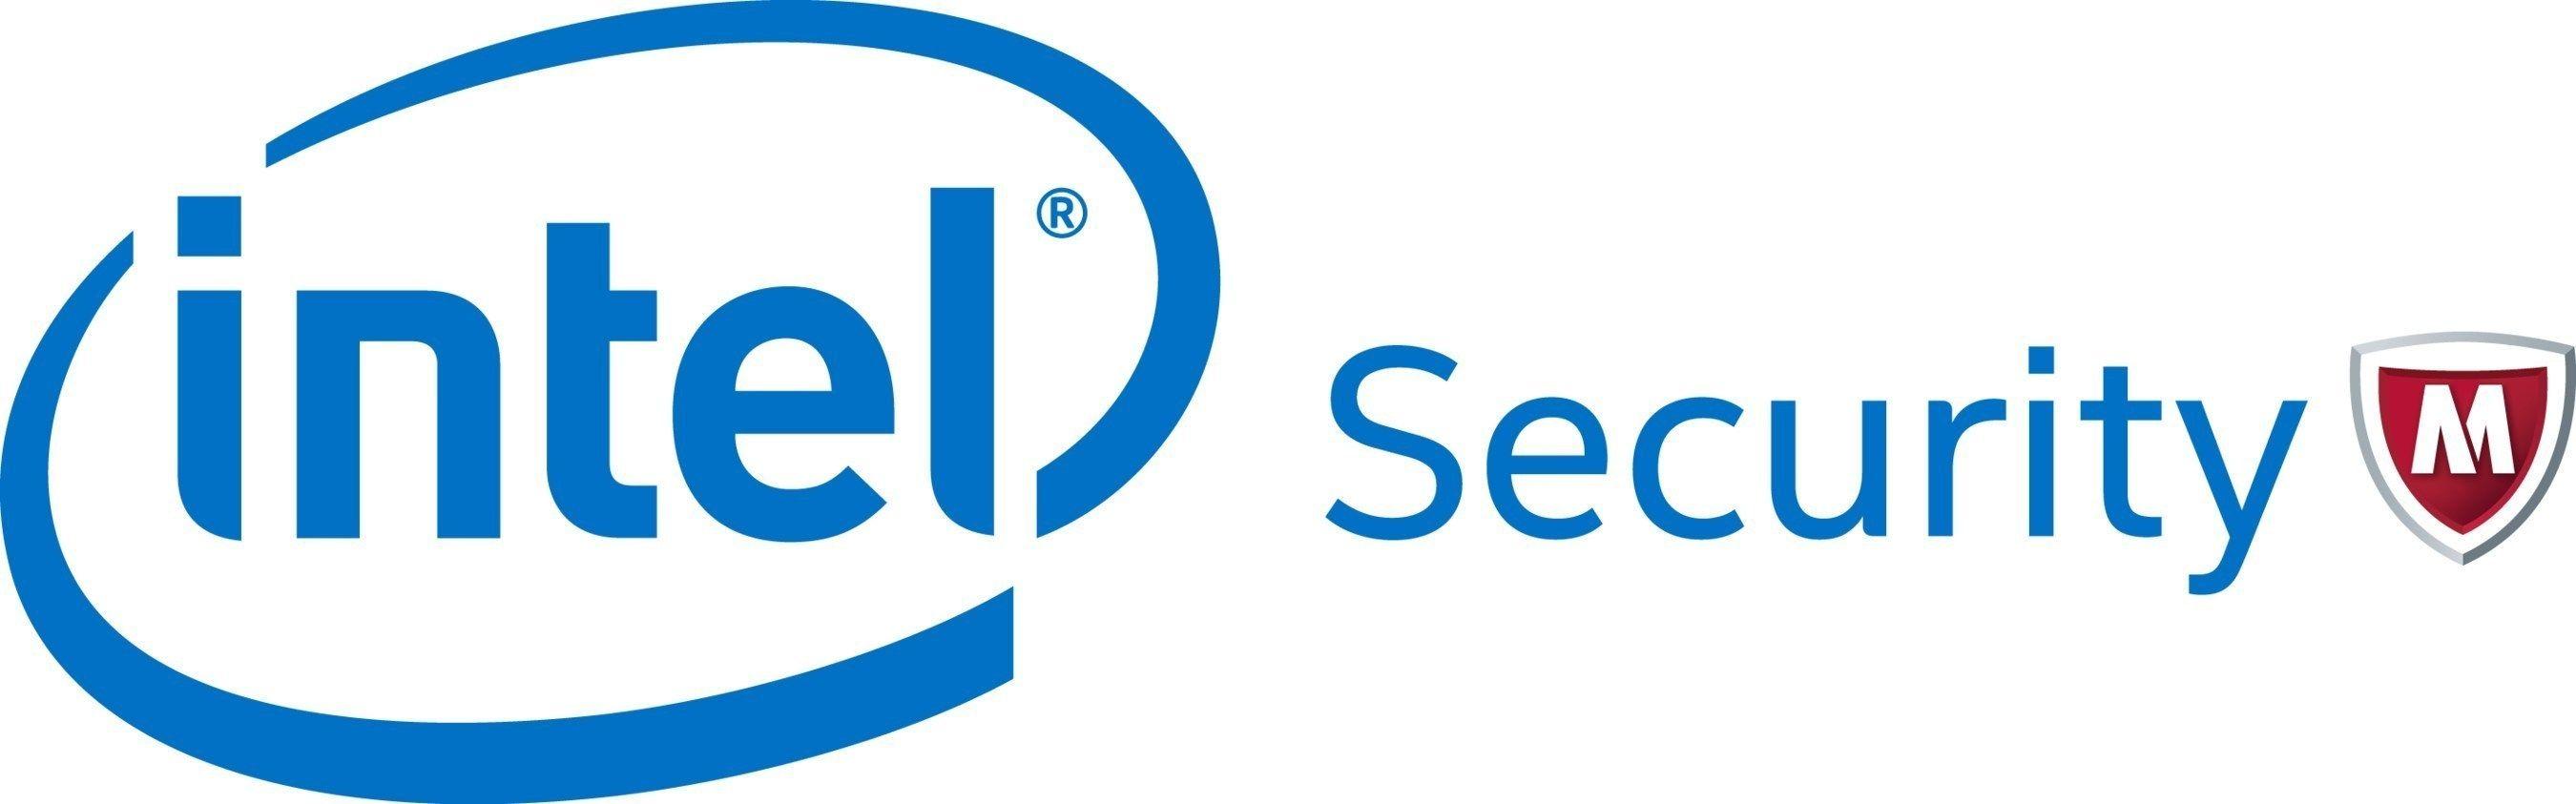 Intel Security Logo - BT And Intel Security Collaborate To Develop Next Generation ...